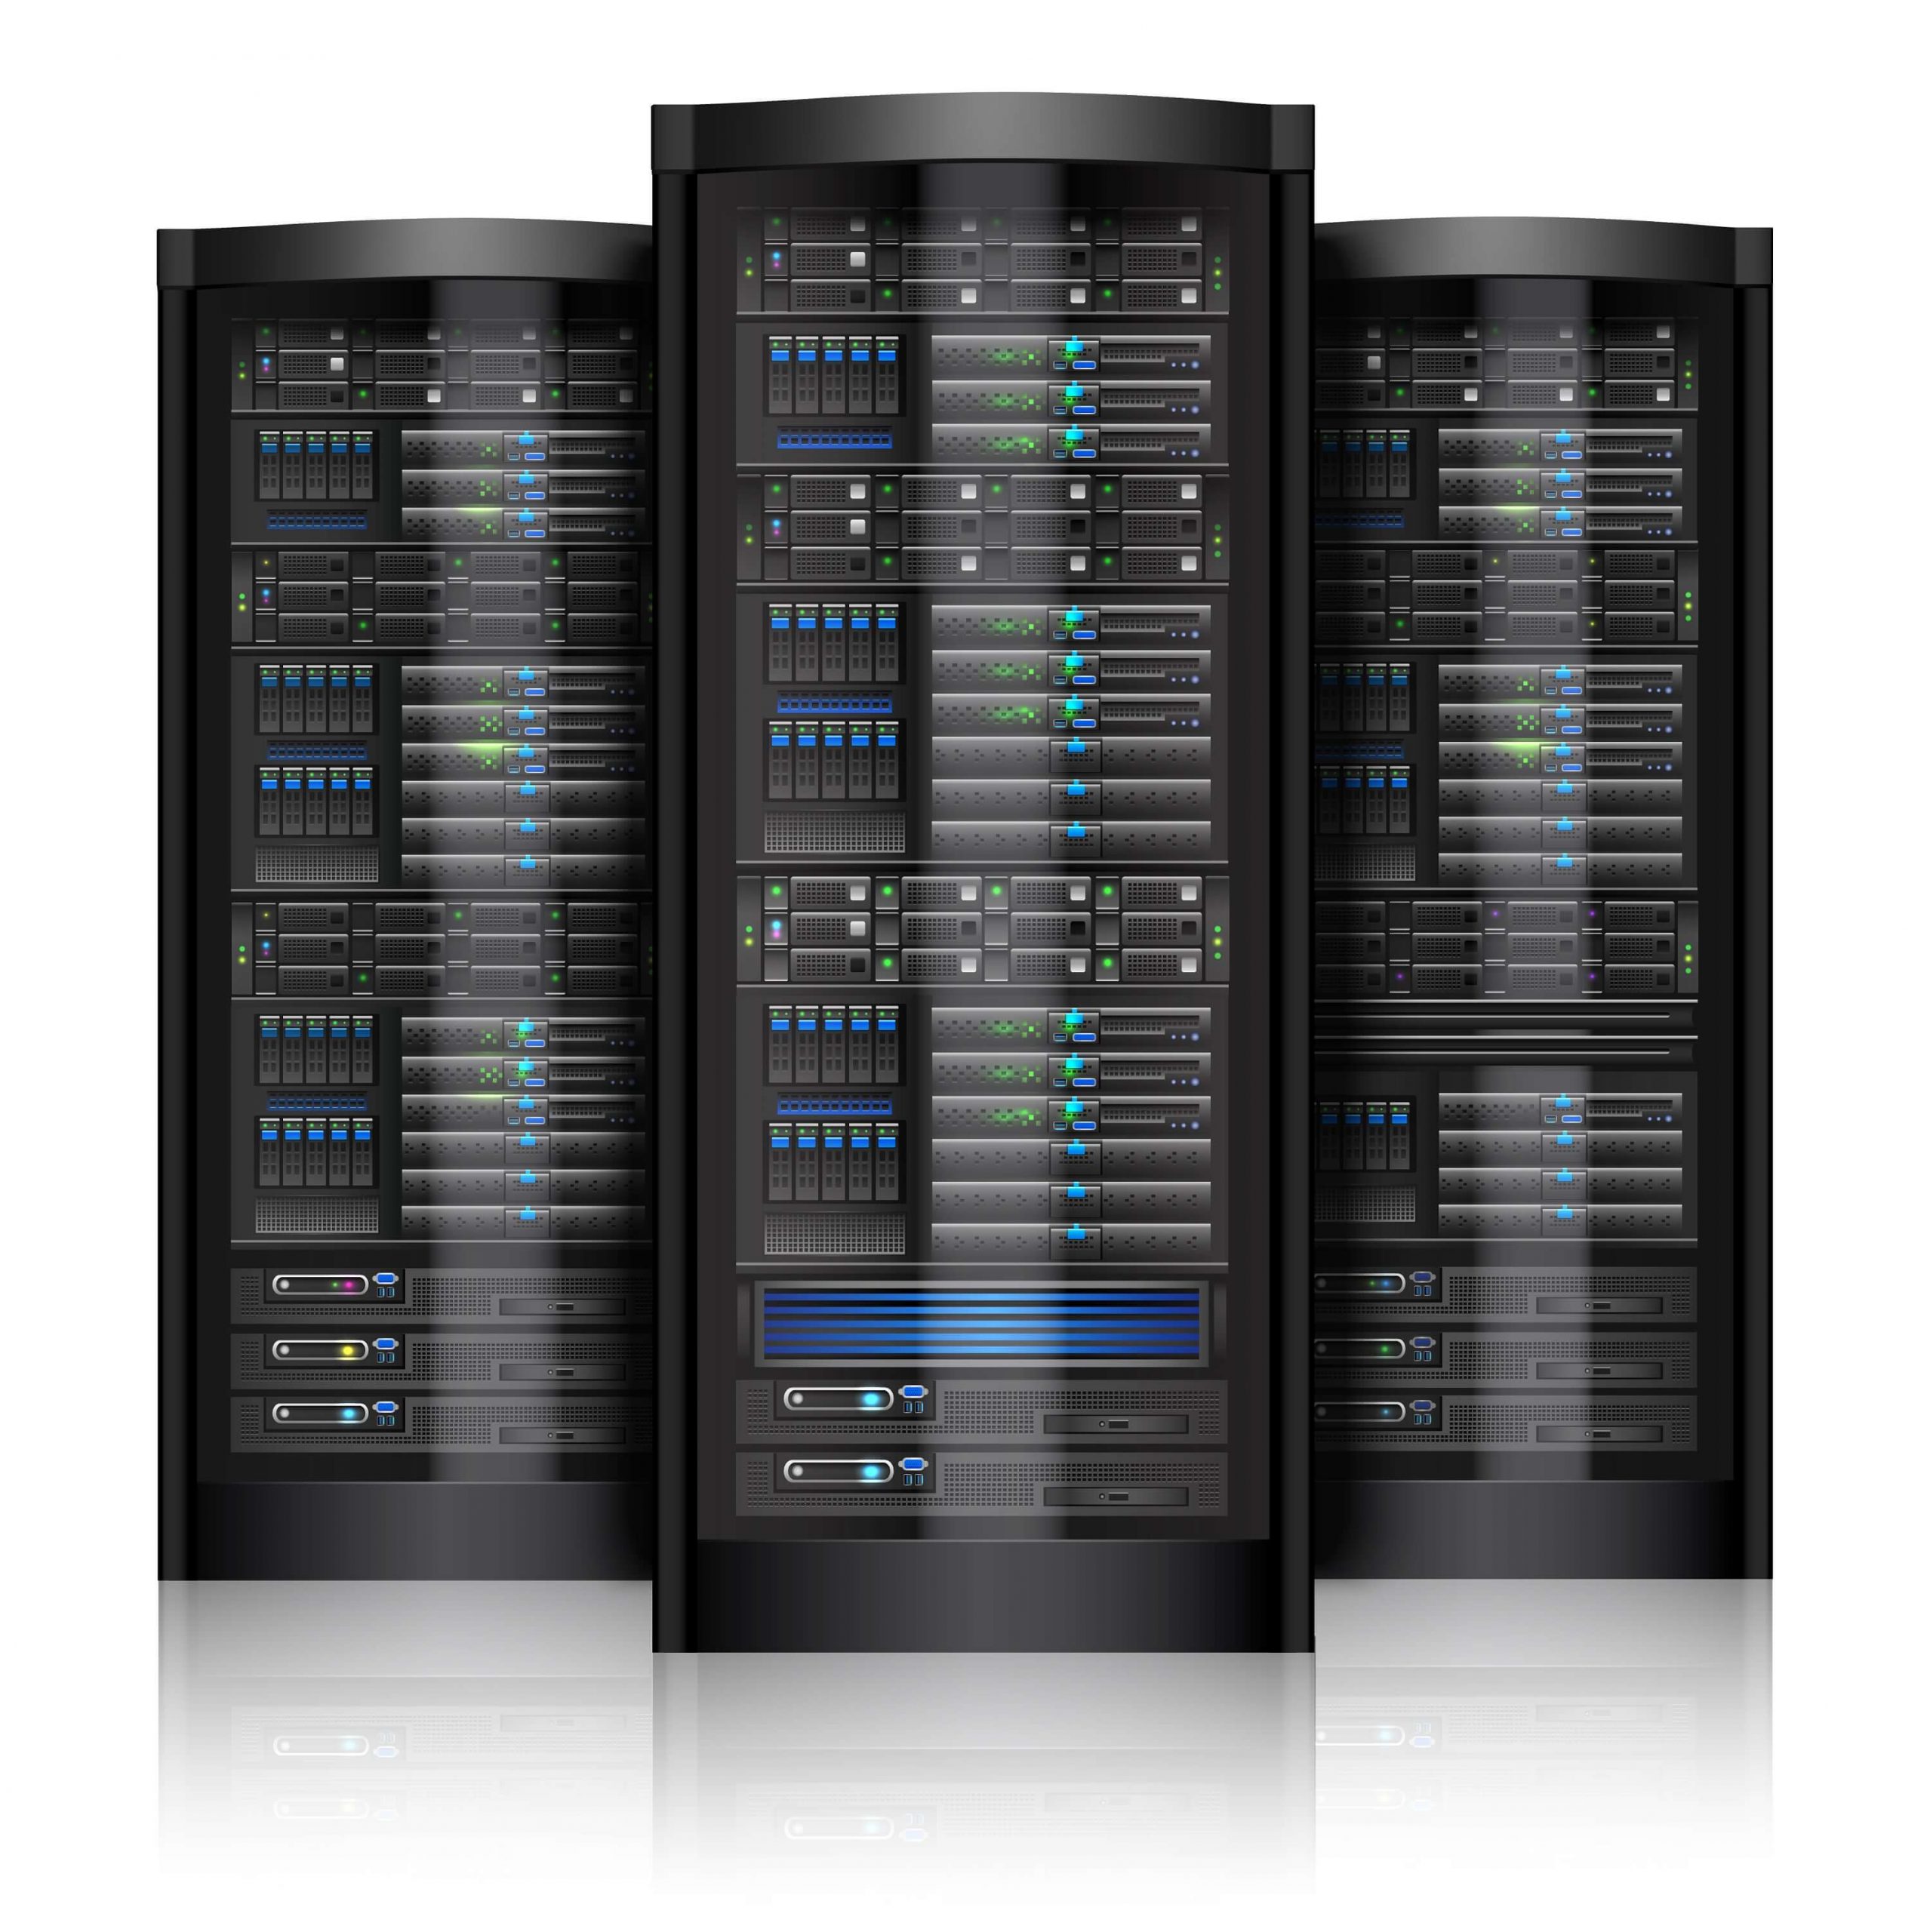 Data Center Rack Market Expected to Expand at a Growing CAGR of 8.7% through 2033